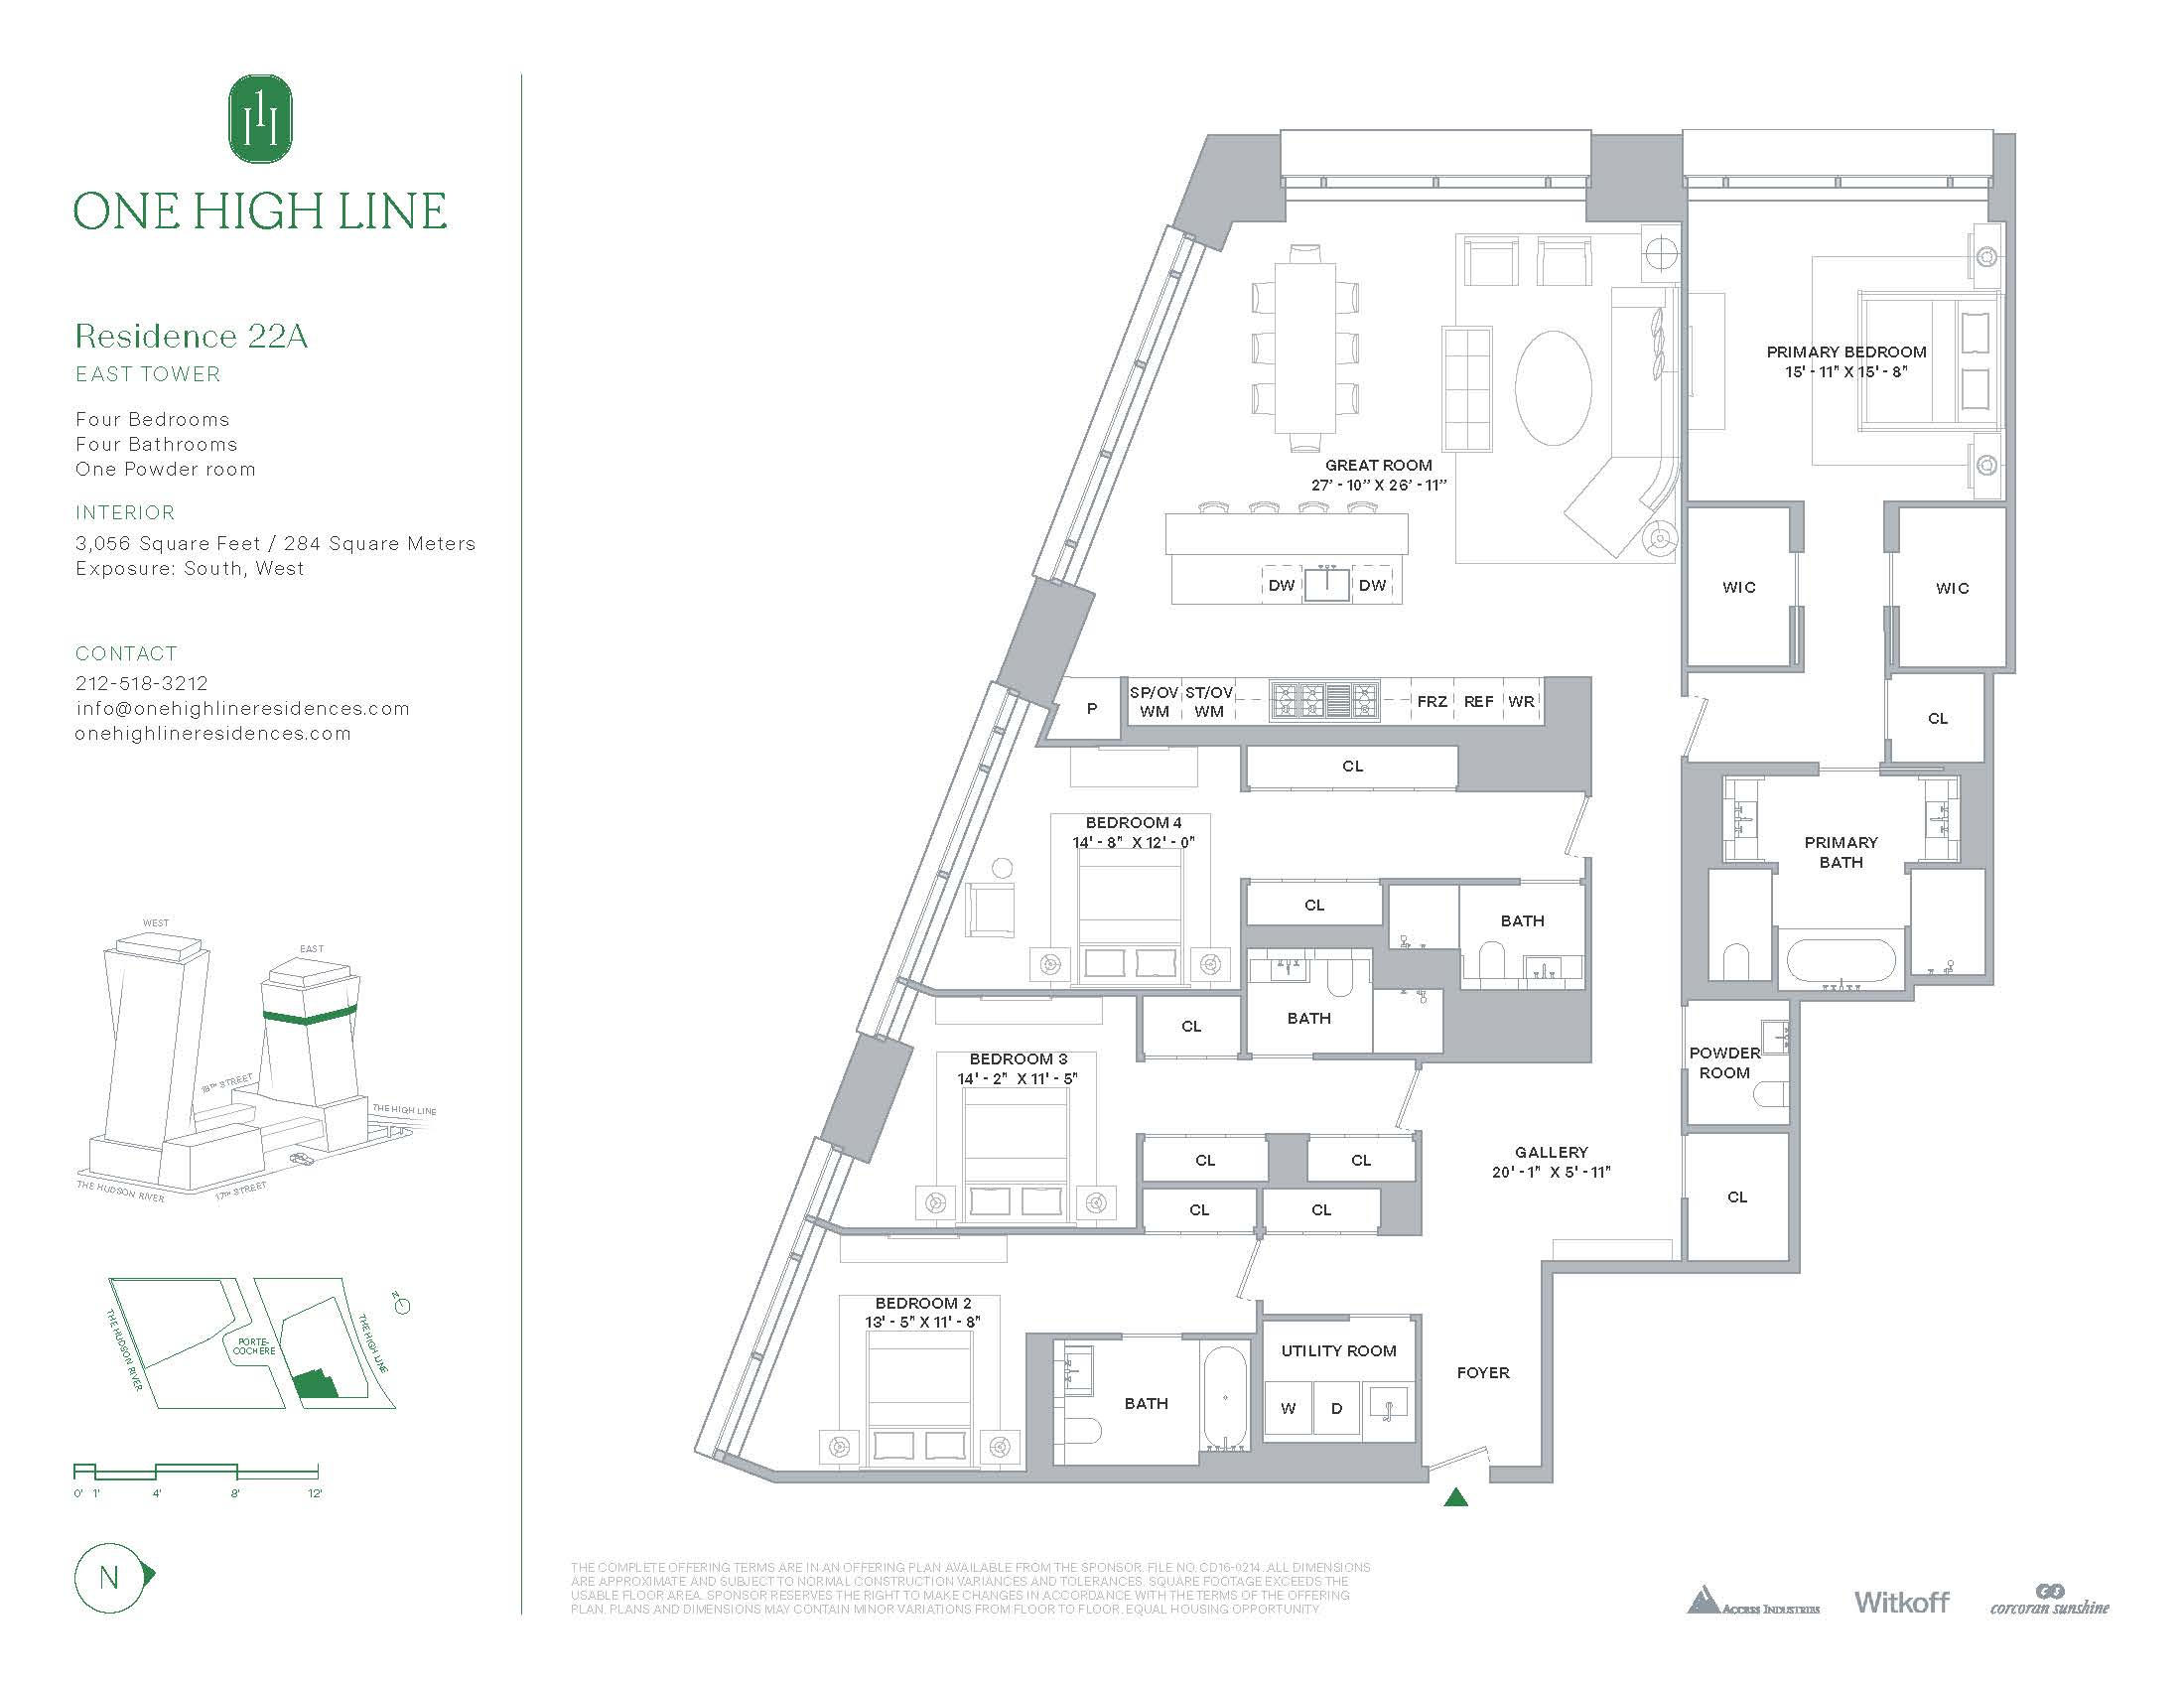 Floorplan for 500 West 18th Street East 22A